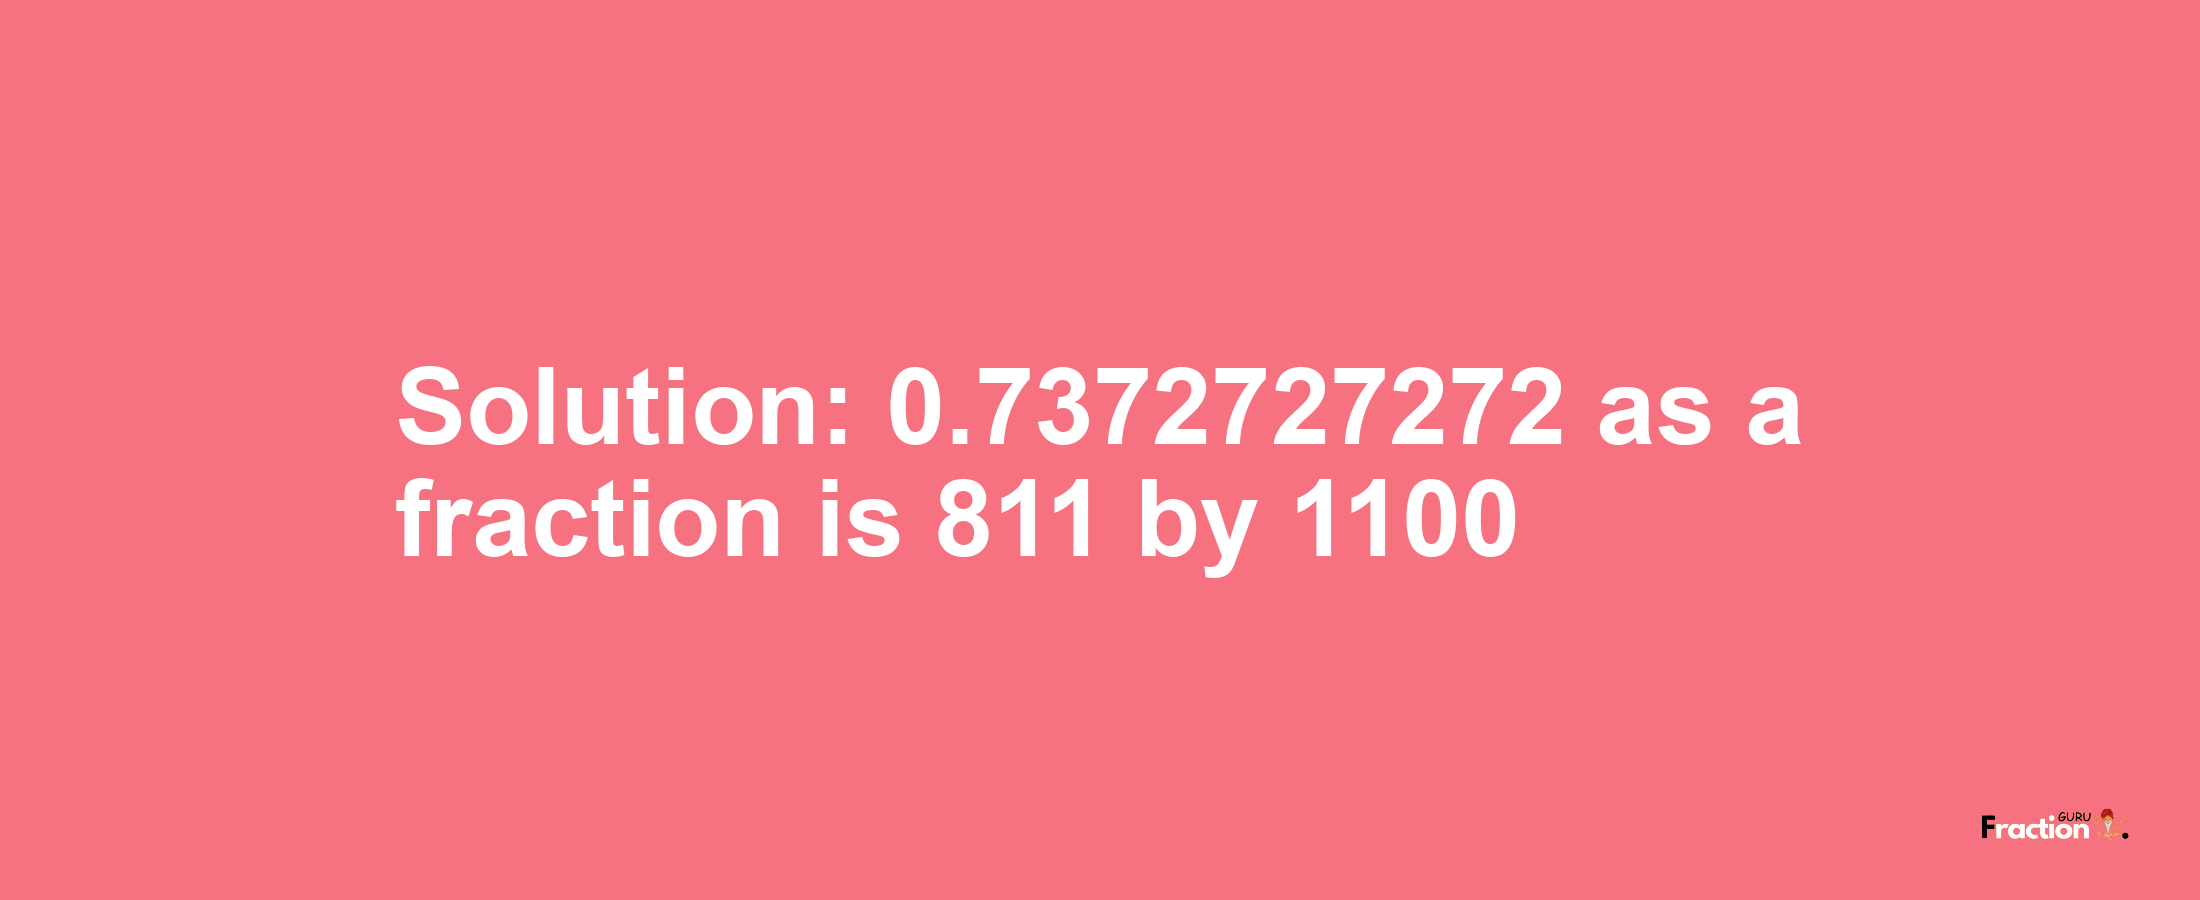 Solution:0.7372727272 as a fraction is 811/1100